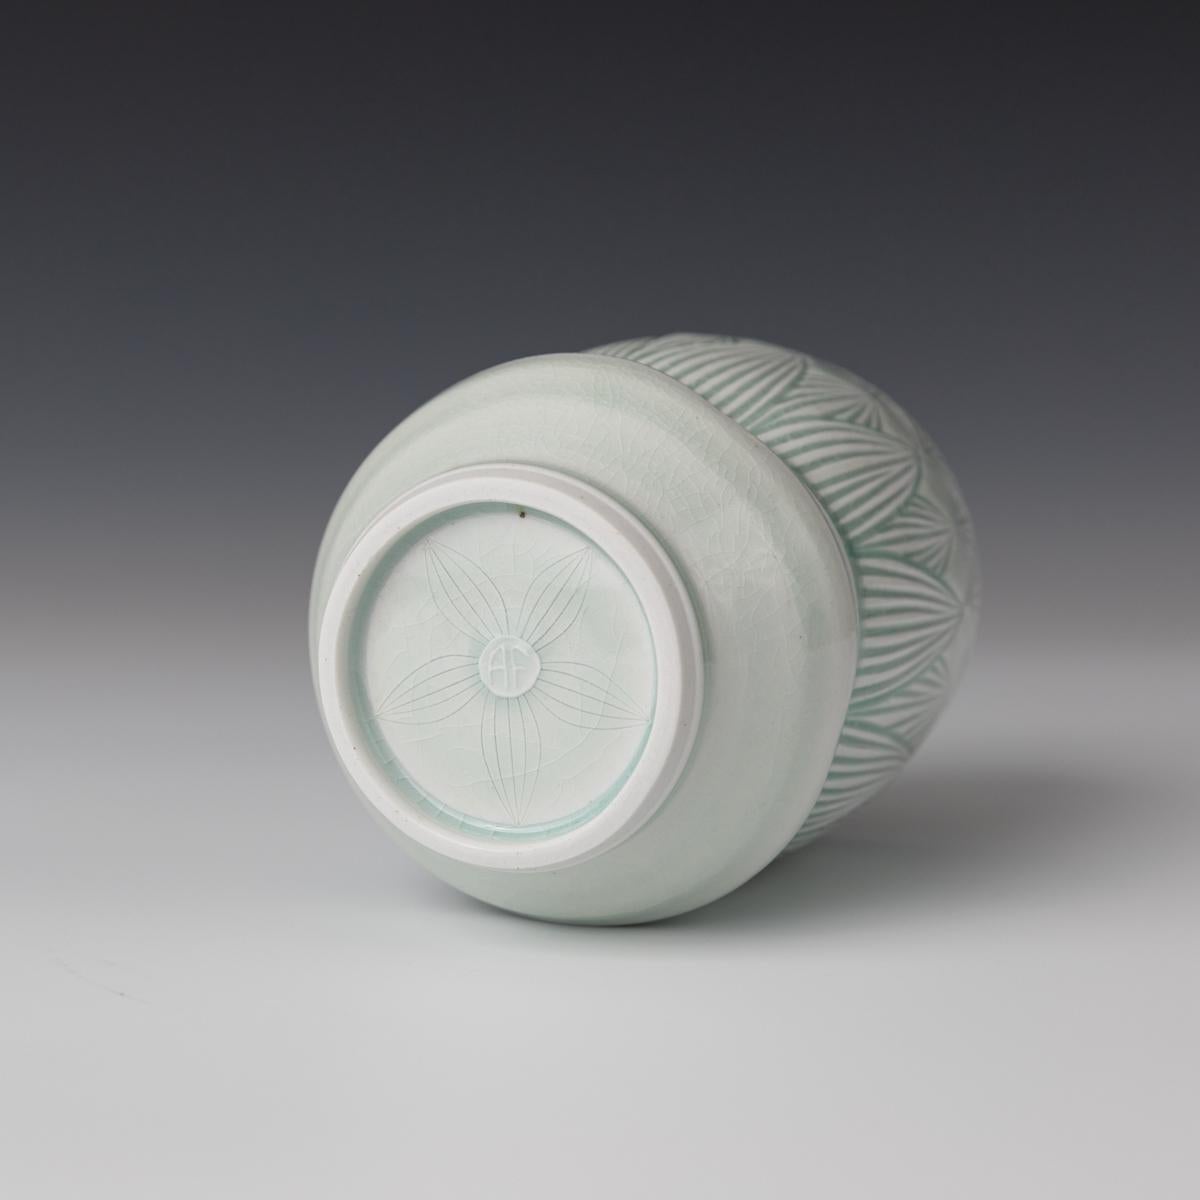 This elegant jar was created by Montana based ceramicist, Adam Field. The jar incorporates Field's love of ancient pottery entwined with the functionality of Colonial American Ware. Inspired by nature, many of Field's forms contain a variety of